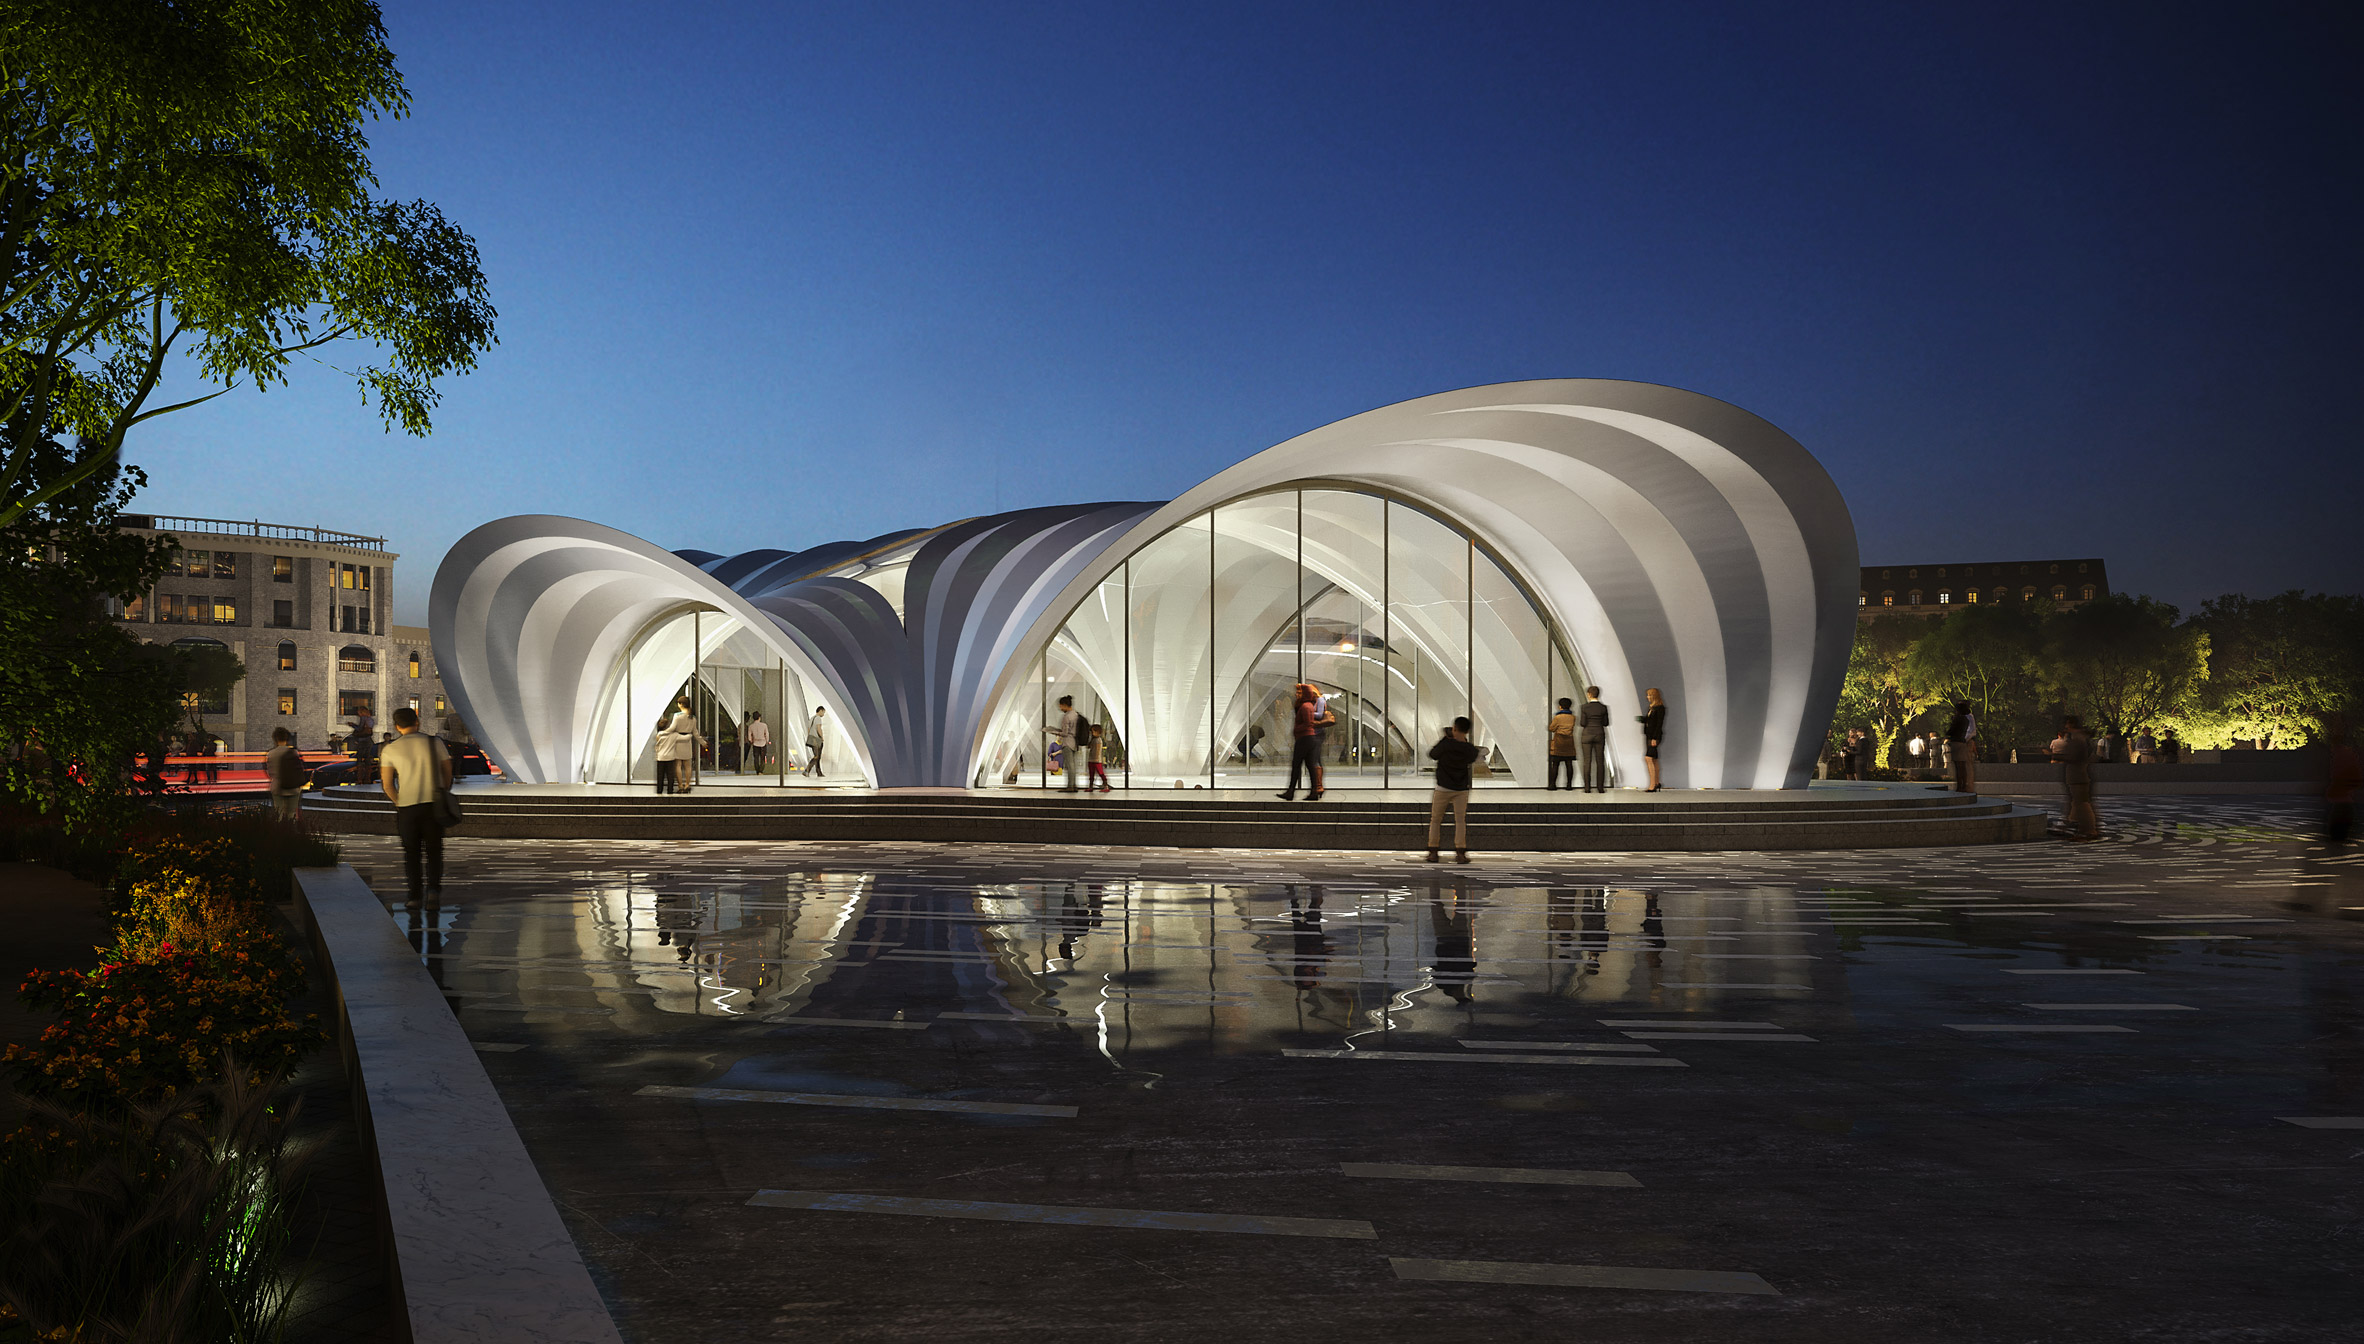 Render of the steel Dnipro Metro station lit at night